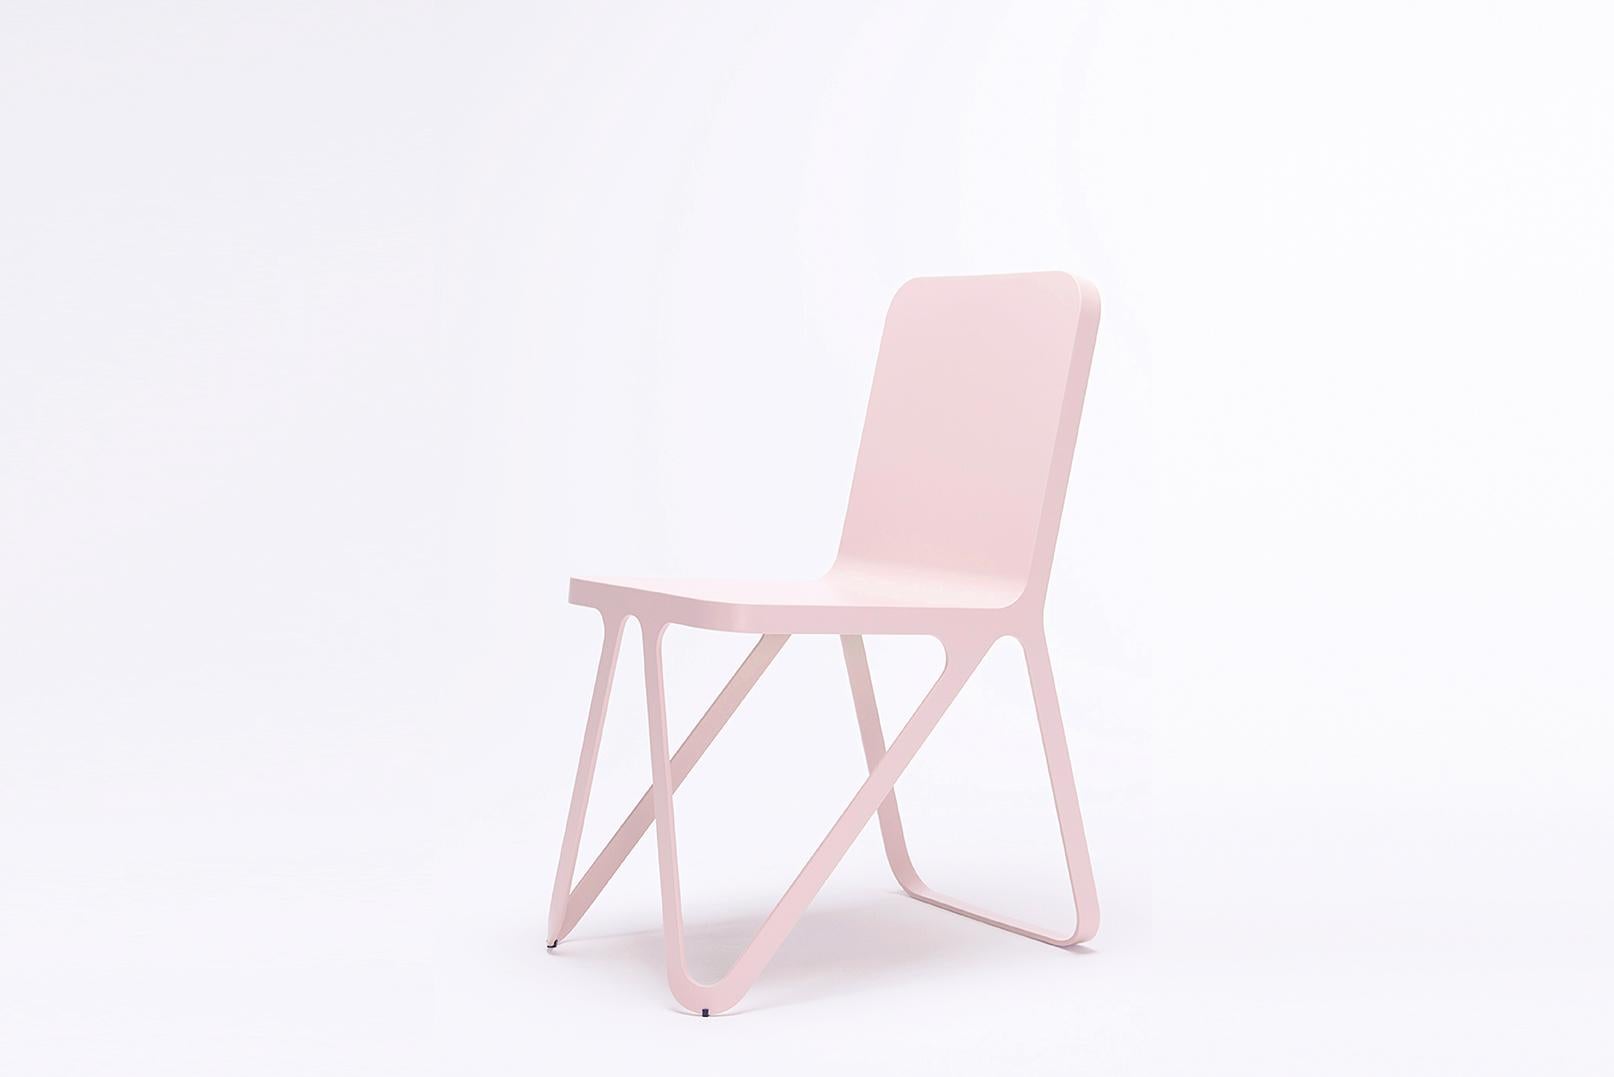 Rose loop chair by Sebastian Scherer
Dimensions: D57 x w40 x H80 cm
Material: Aluminium.
Weight: 5.1 kg.
Also available: Colours: Snow white / light sand / sun yellow / clay orange / rust red / space blue / graphite grey / dark bronze / night